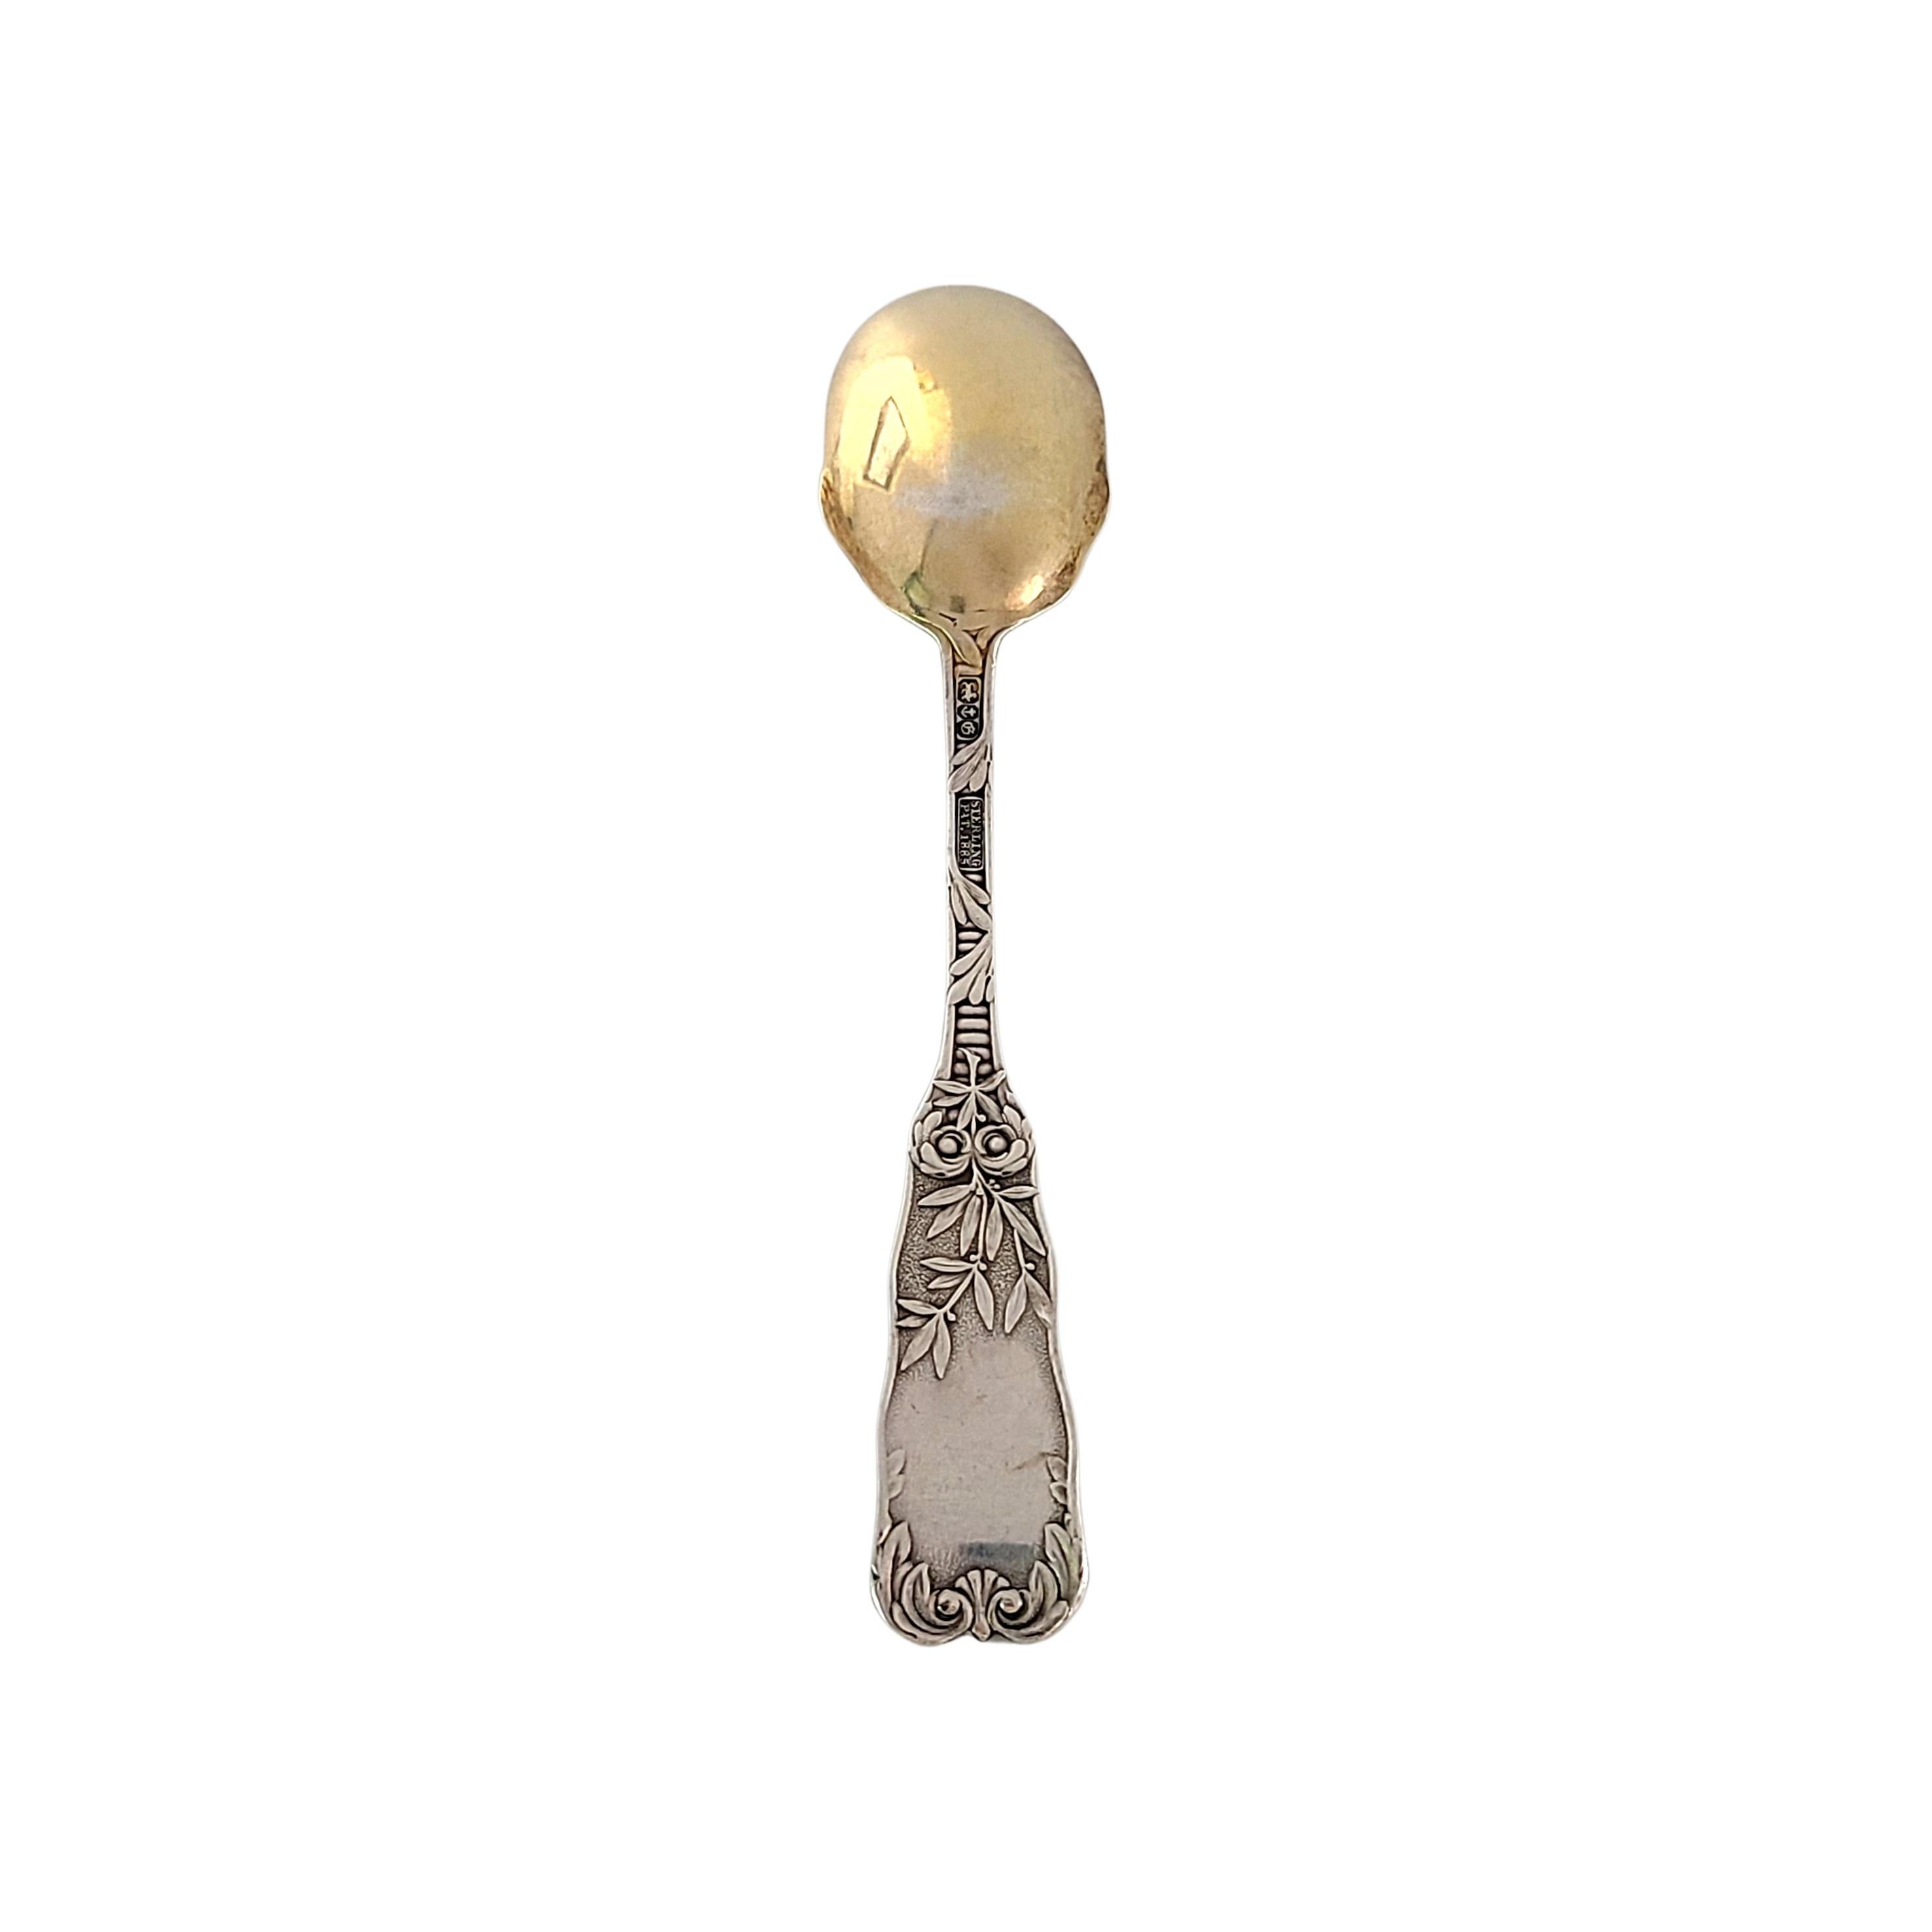 Sterling silver bright cut gold wash ice cream spoon by Gorham in the St Cloud pattern.

No monogram.

Gorham's St Cloud pattern was designed by Walter Wilkinson in 1885. This spoon features a scroll and leaf design on the handle and a gold wash